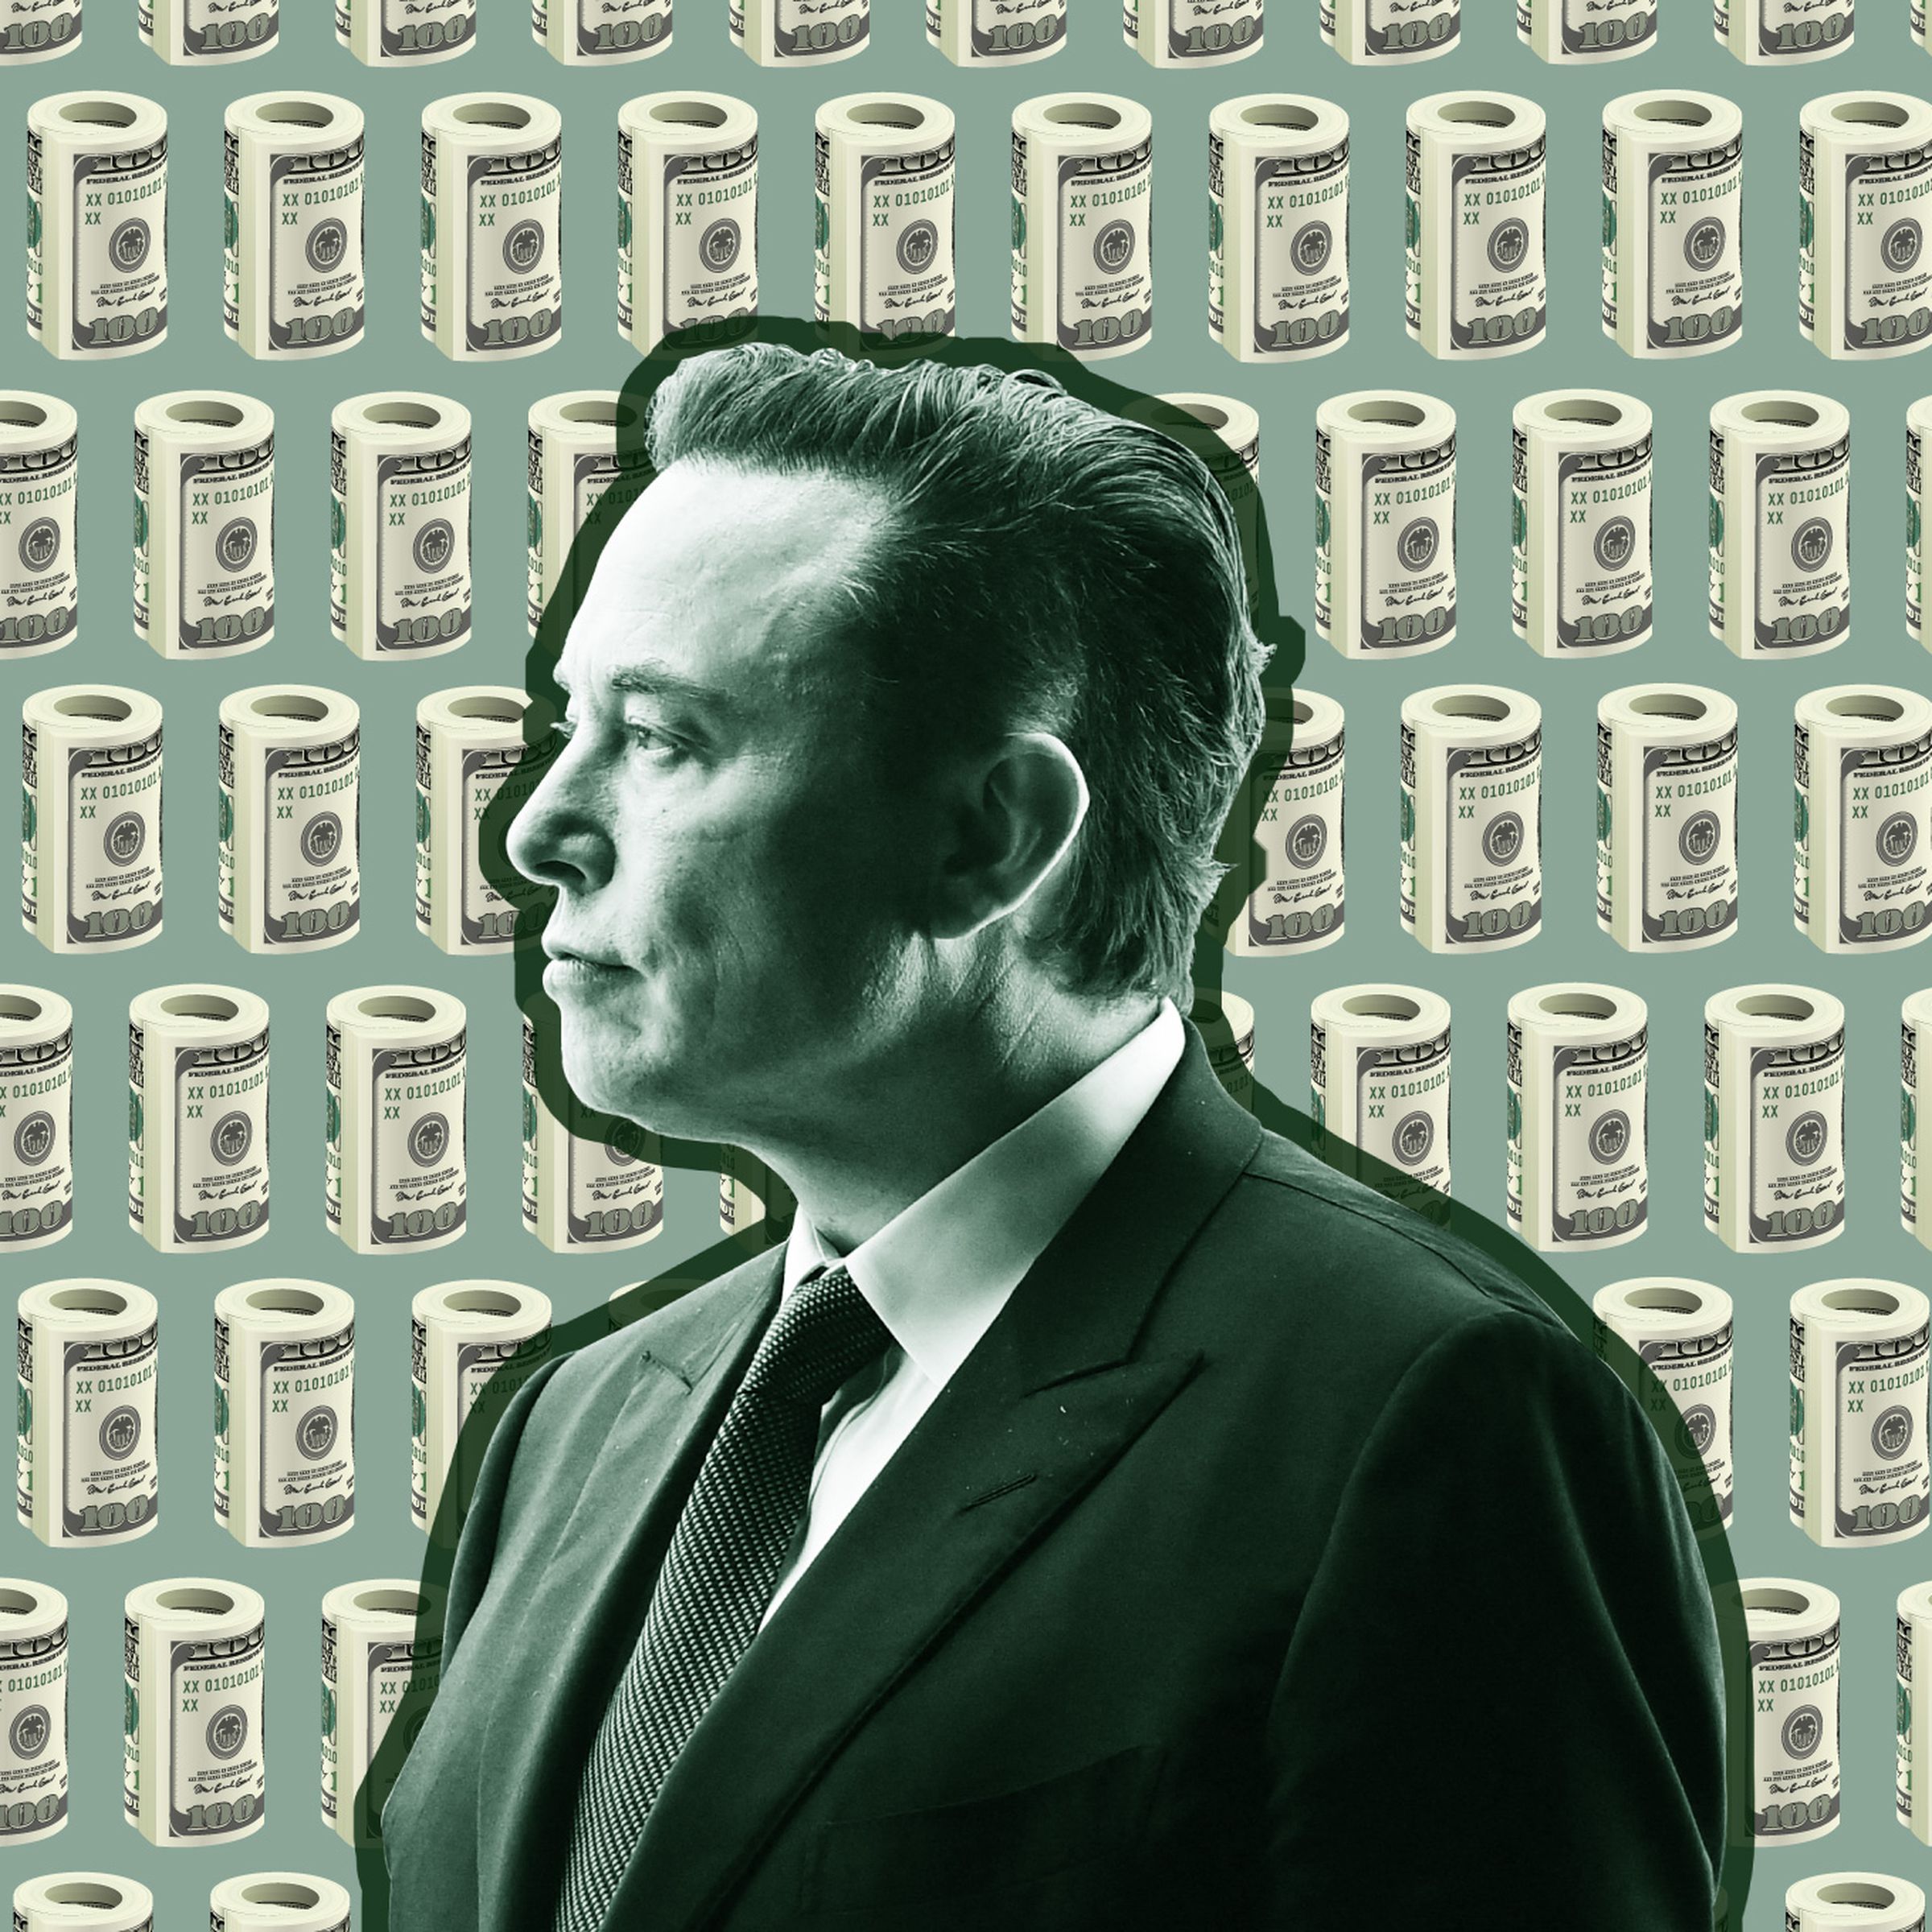 An image of Elon Musk on a background with a repeating pattern of folded dollar bills